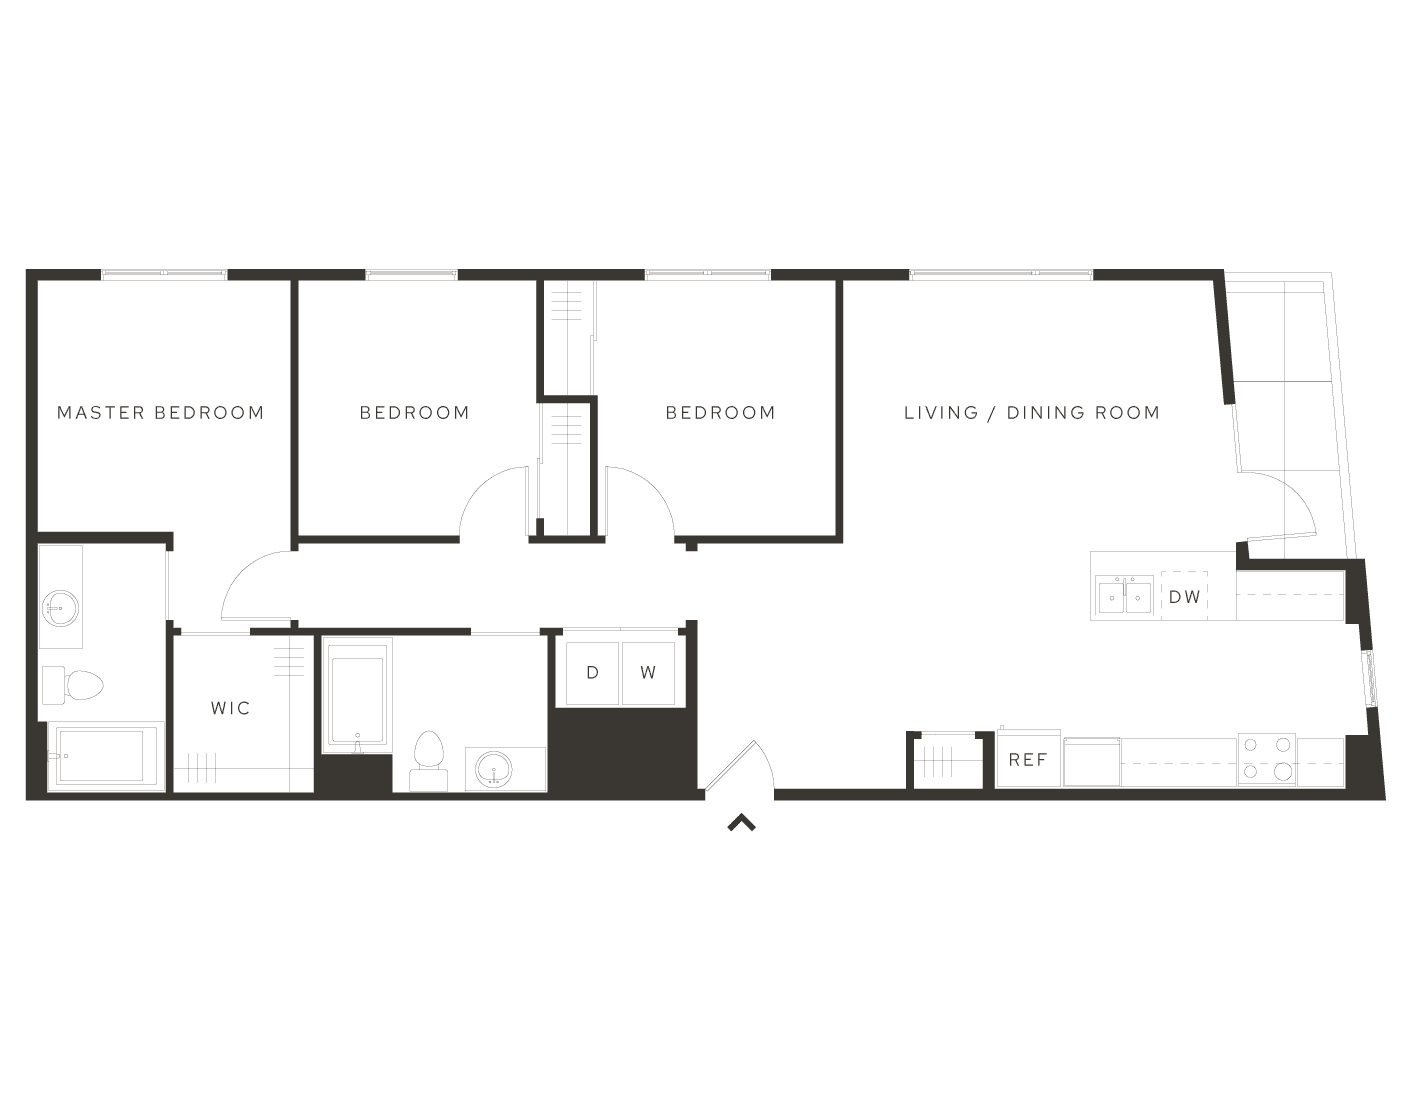 Penthouse apartment floor plan at Salt Lake City's Avia community featuring large living/dining room.